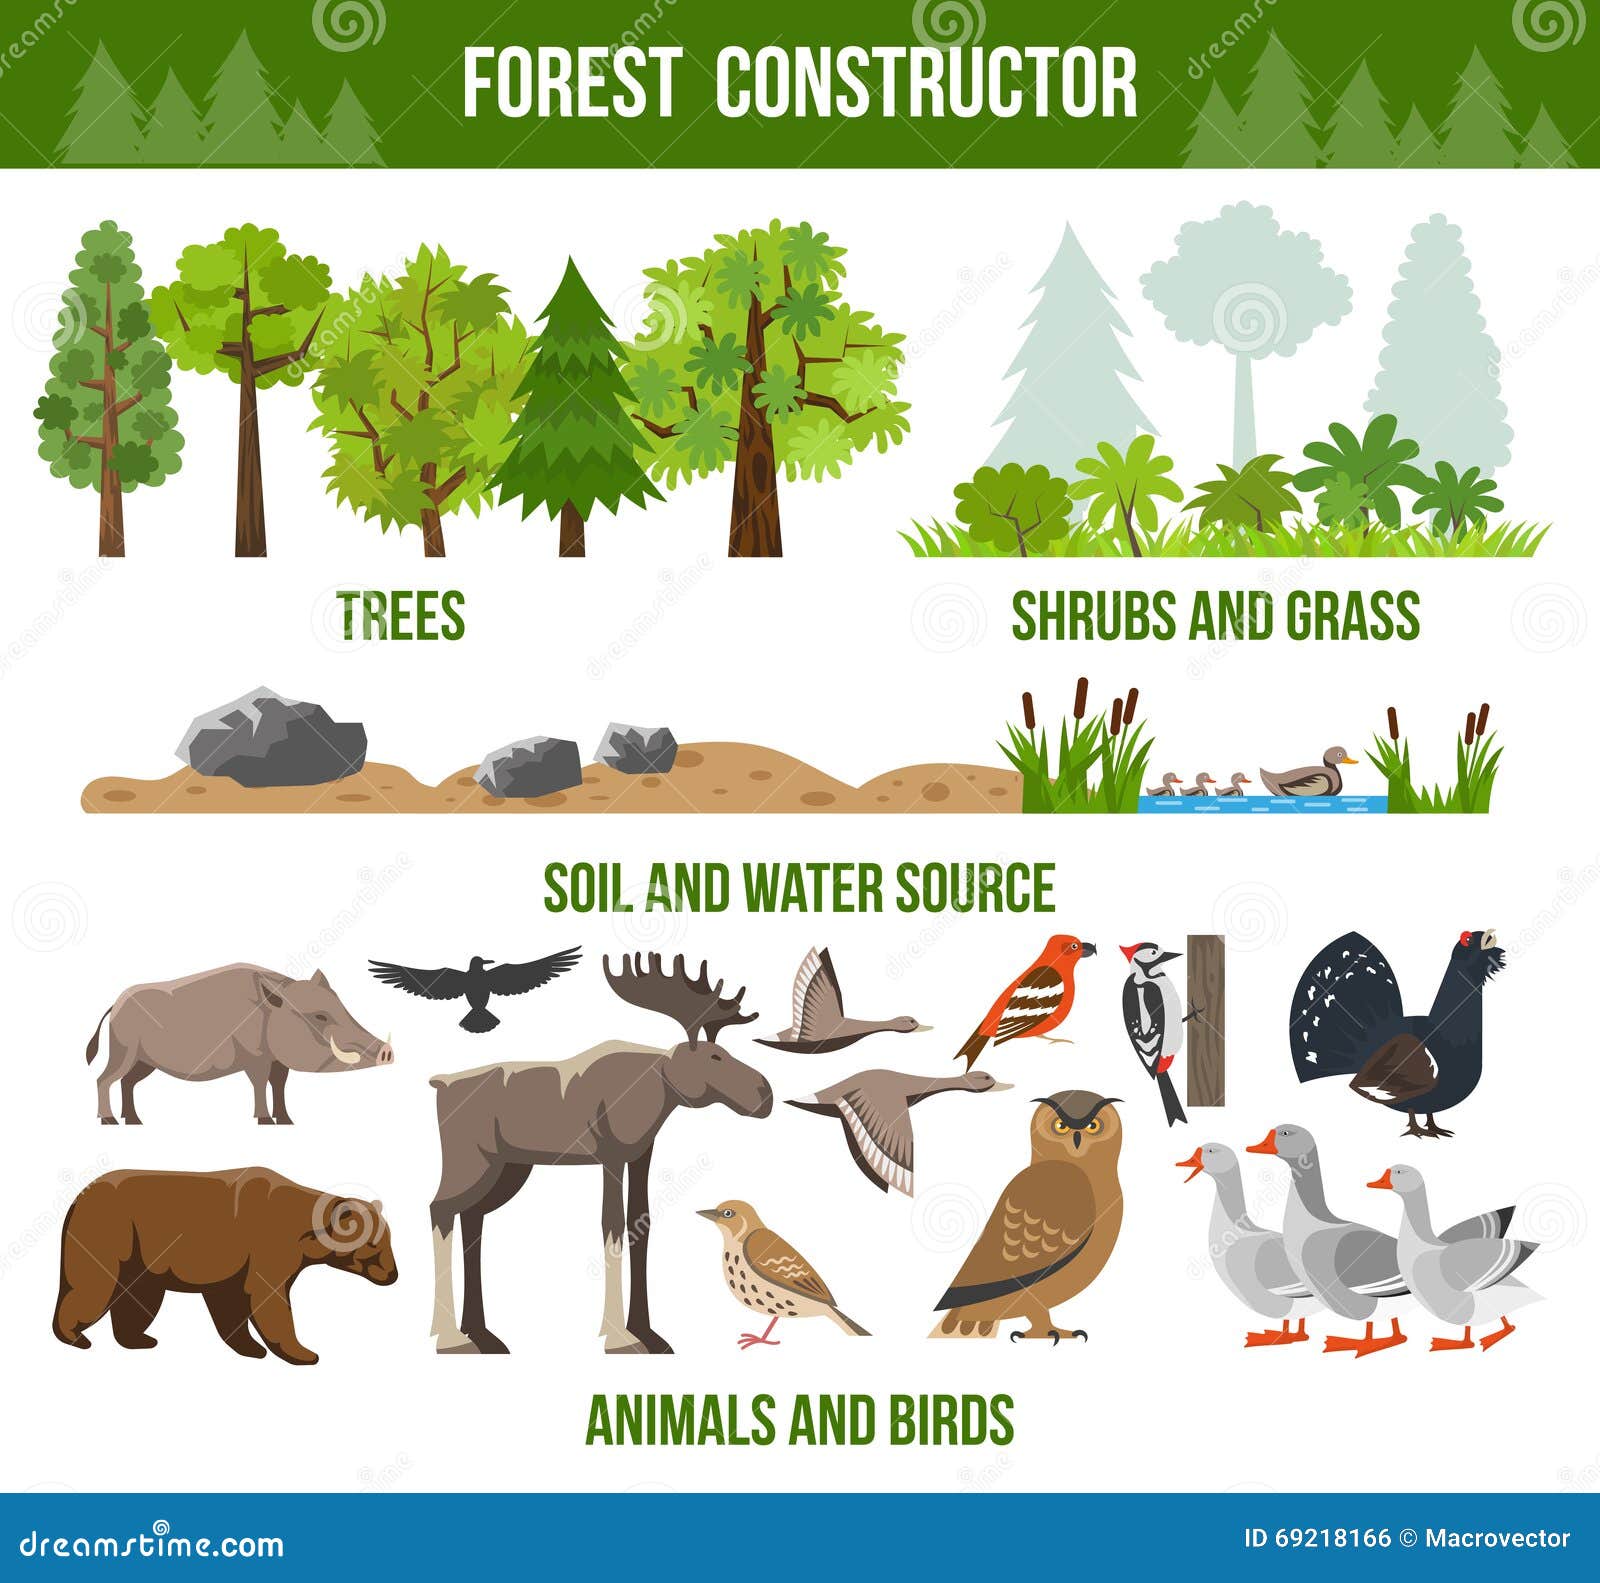 Forest Constructor Poster stock illustration. Illustration of outdoor -  69218166